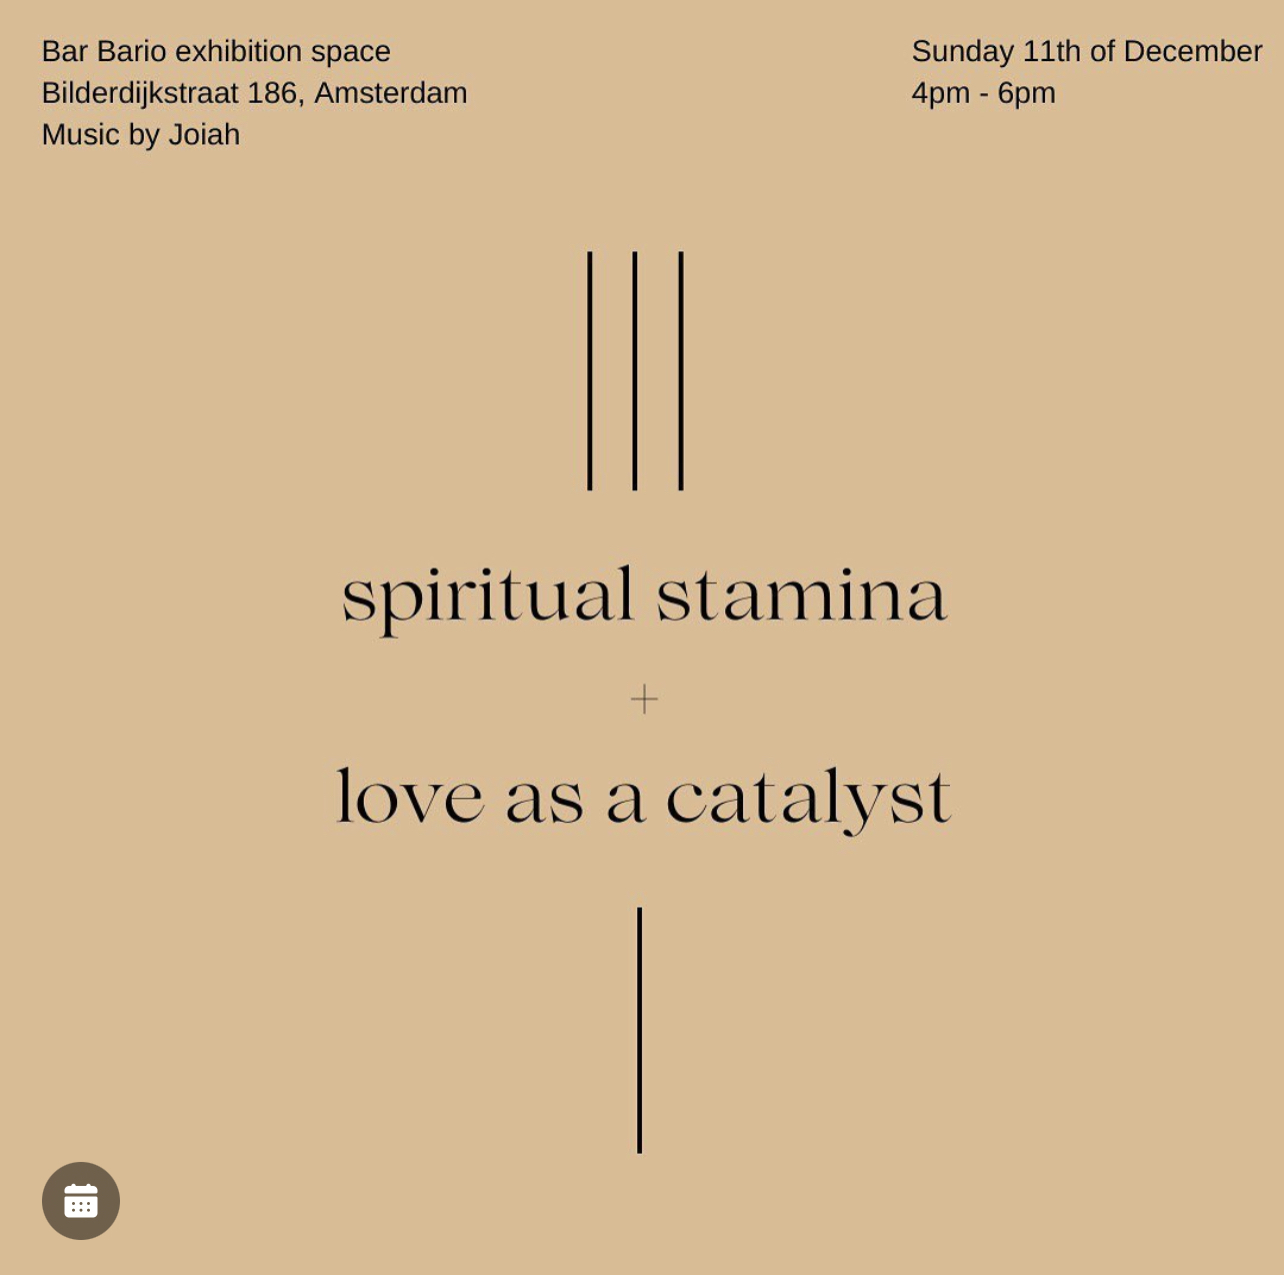 cover for event spiritual stamina + love as a catalyst